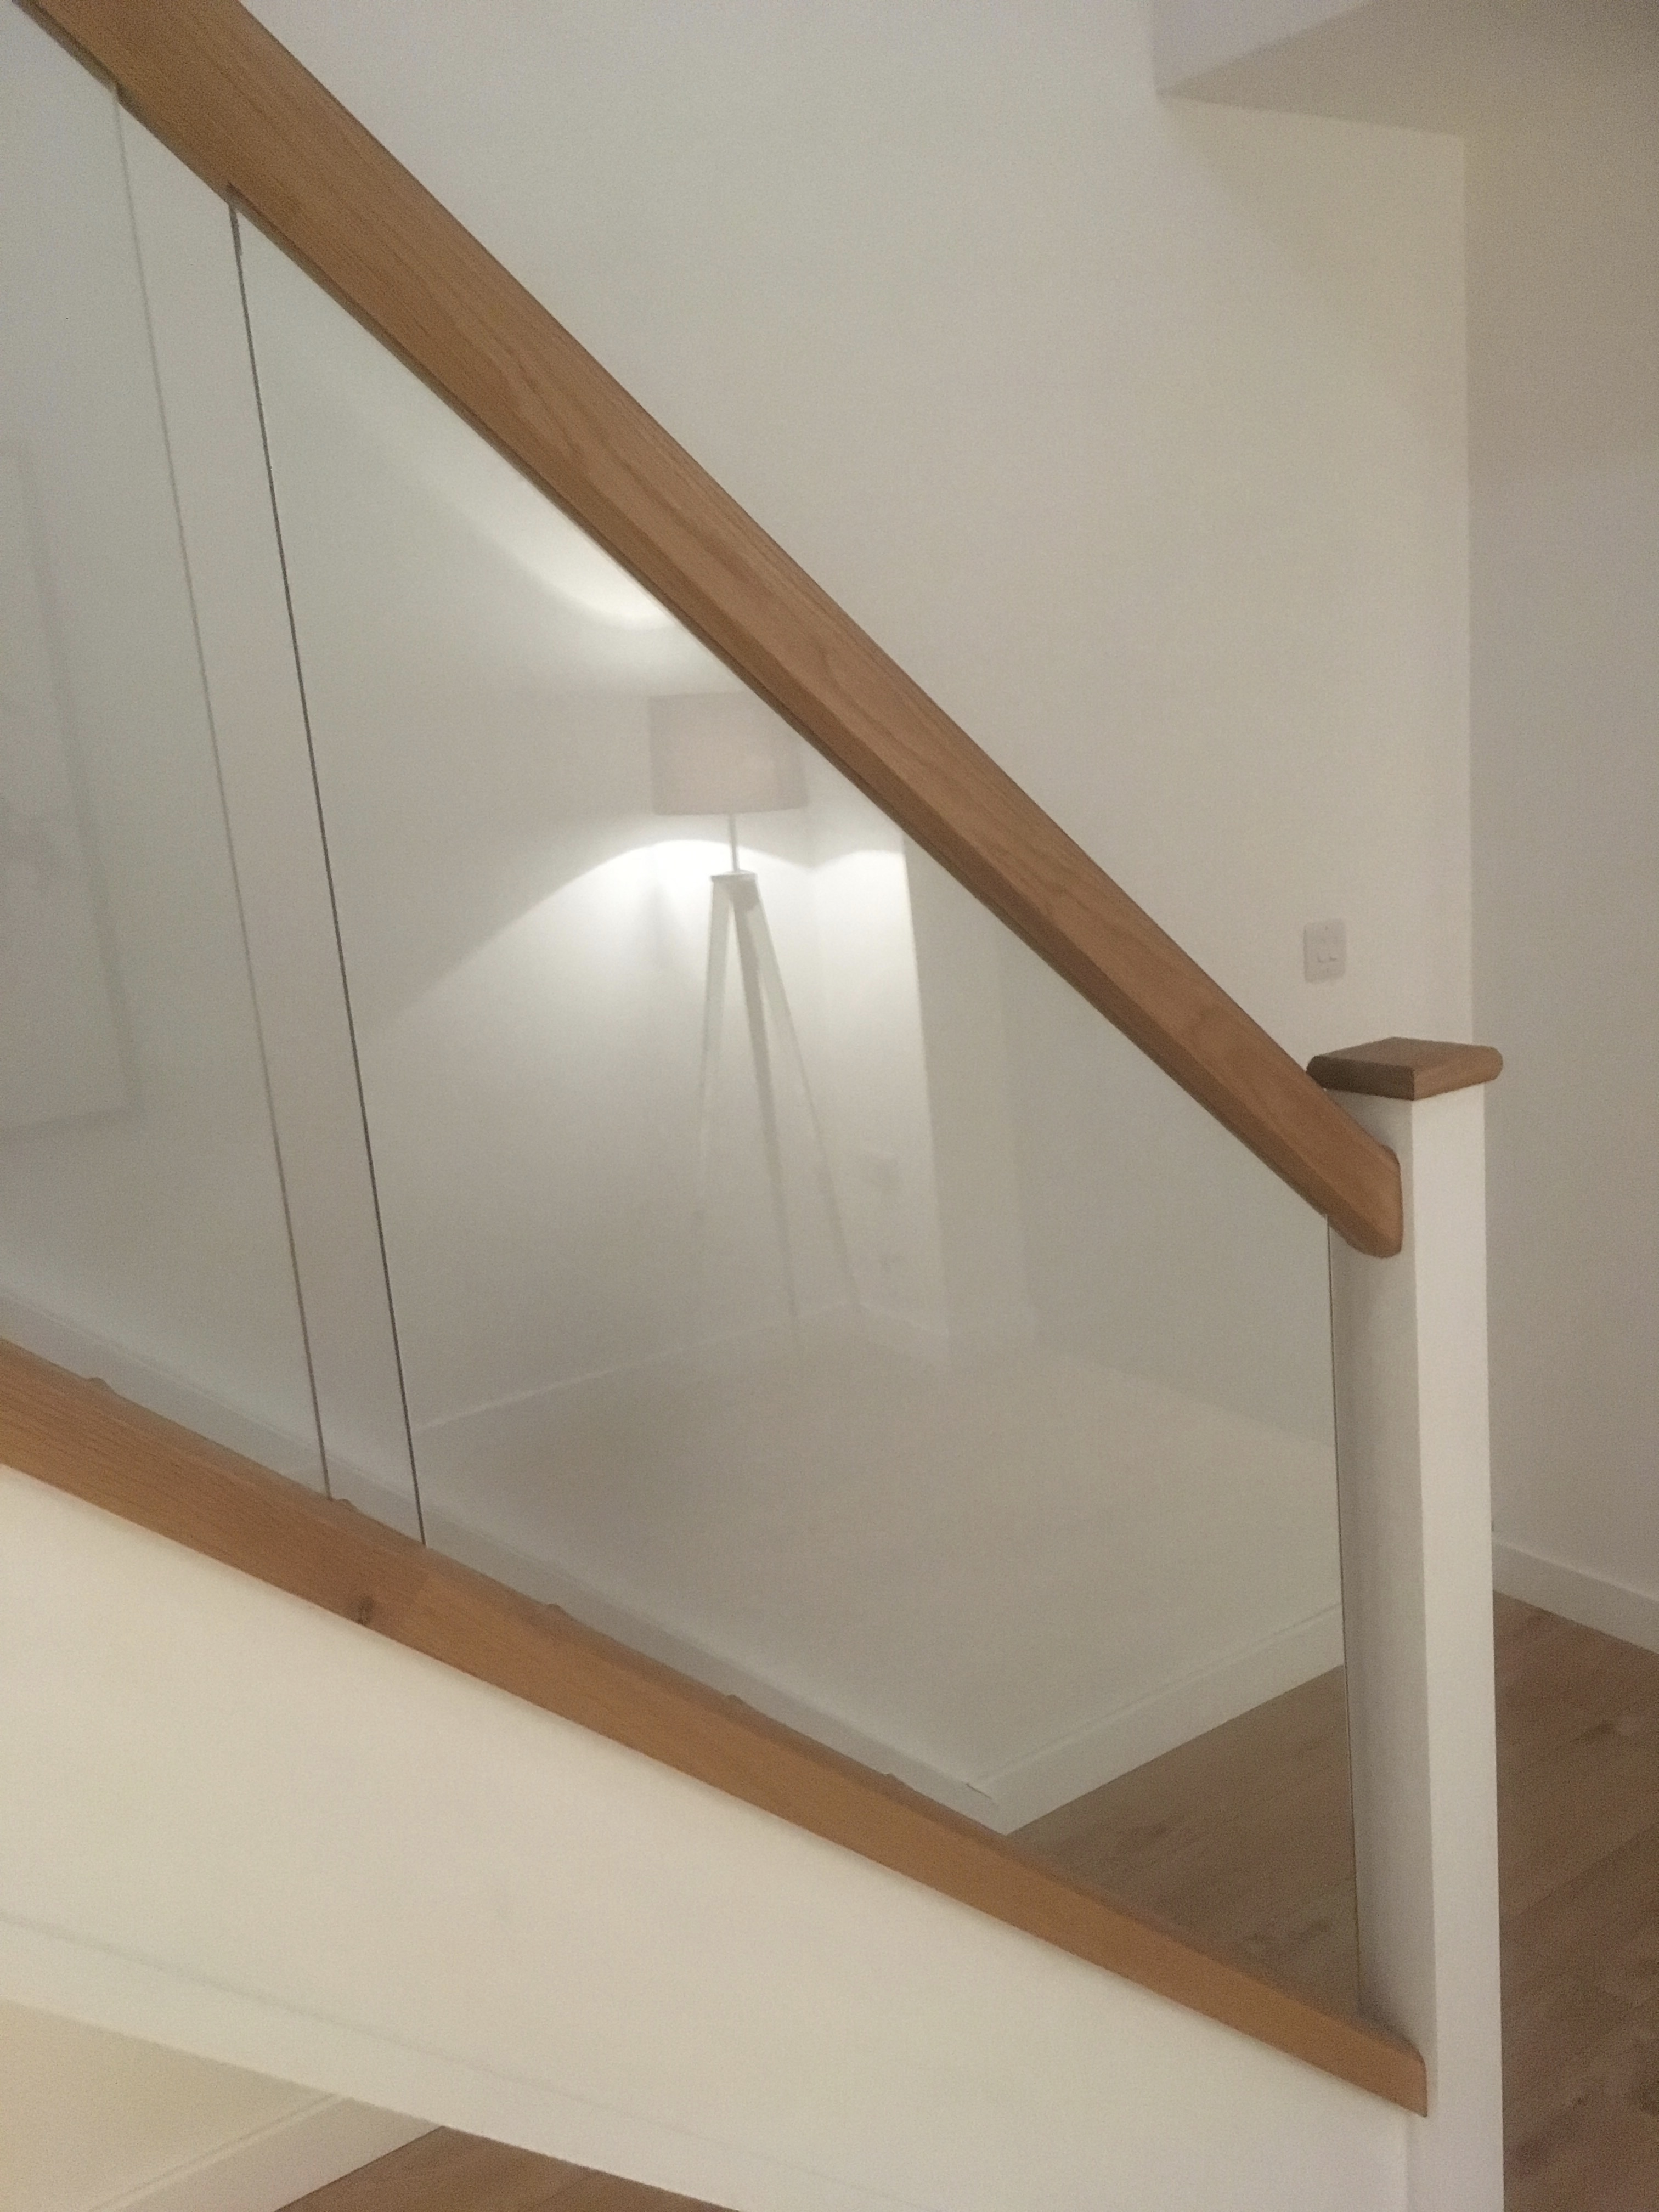 Modernising Staircase - Glass Bannister Kit?? - Page 1 - Homes, Gardens and DIY - PistonHeads